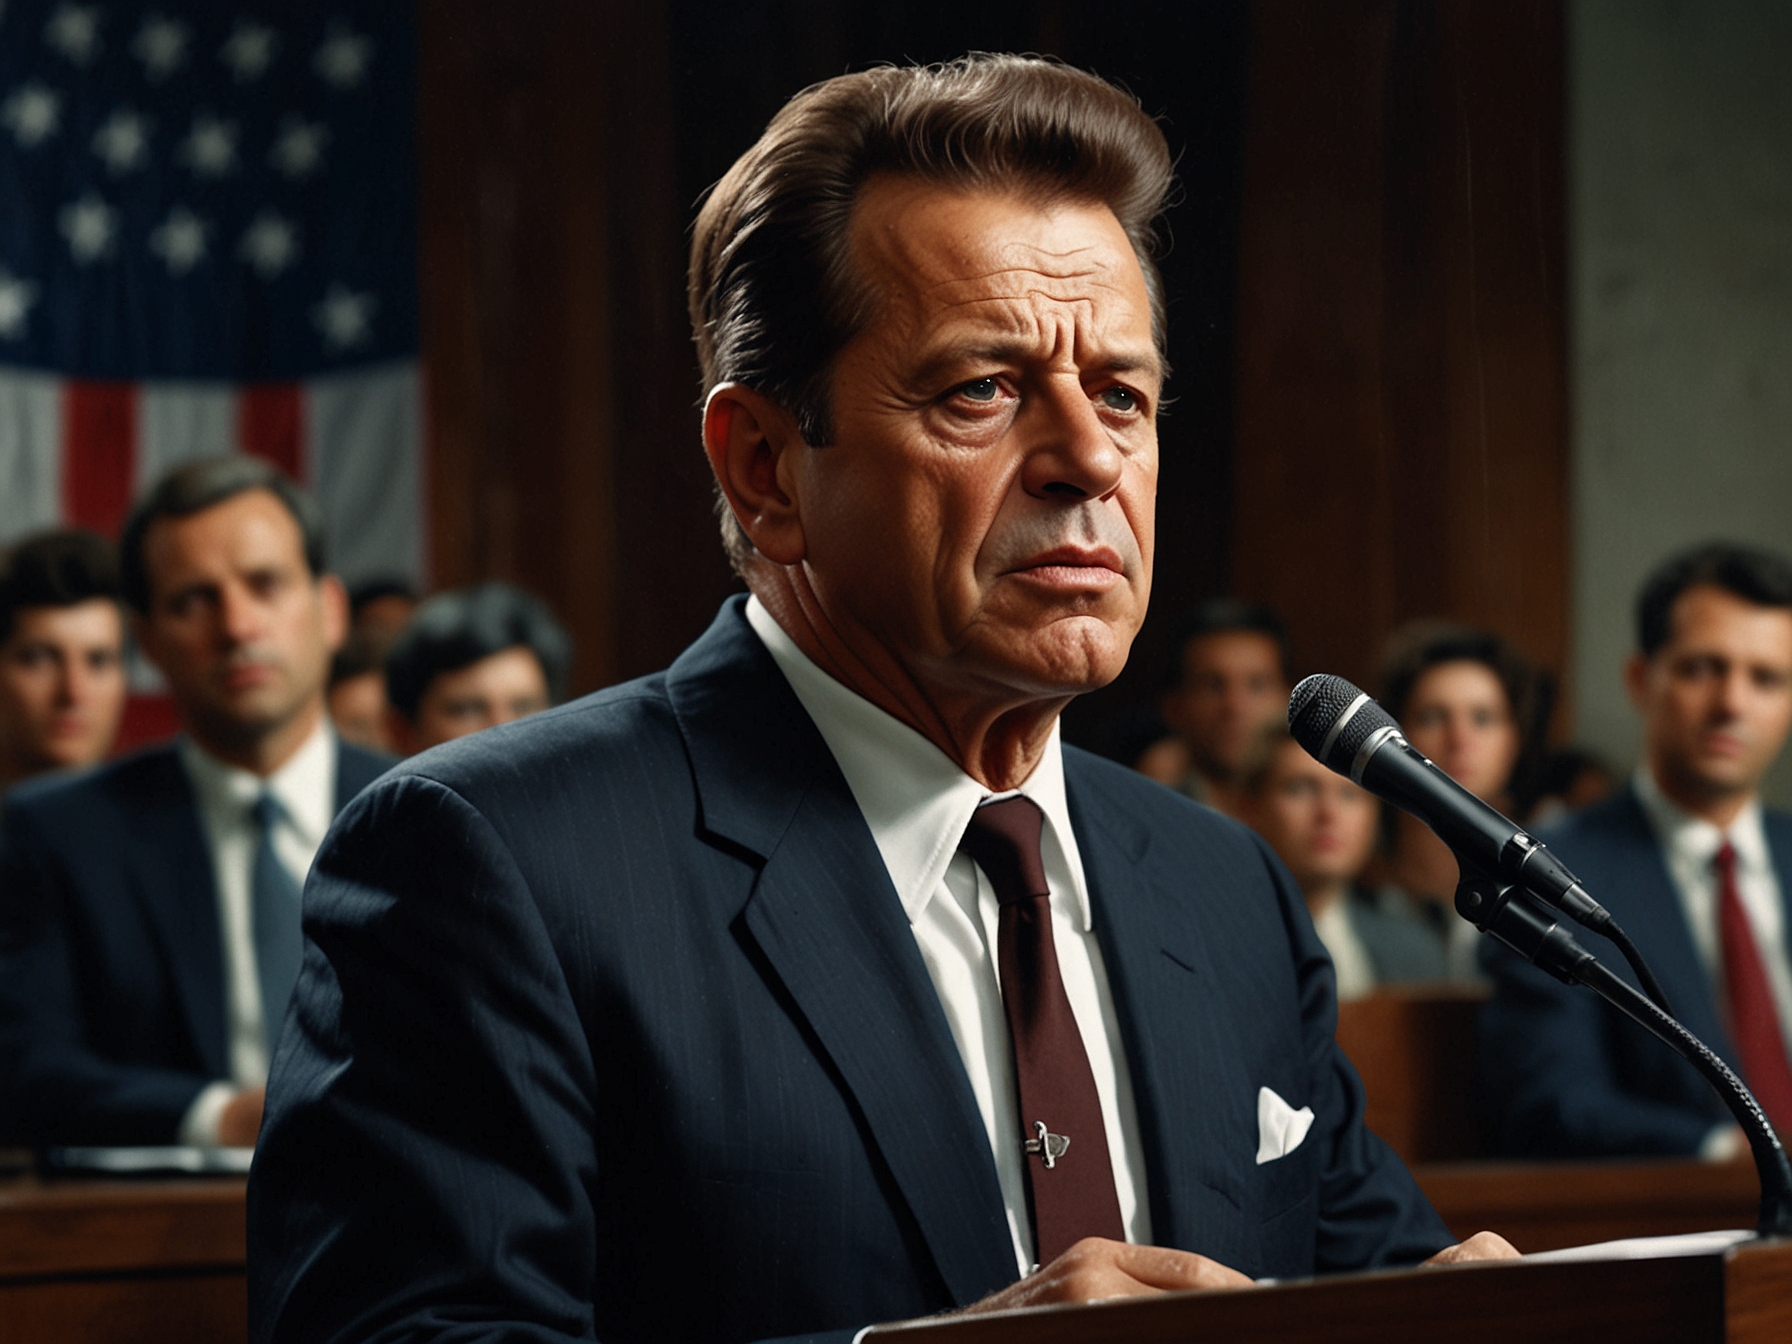 An intense scene from 'JFK' featuring Joe Pesci delivering his iconic monologue, captured with dramatic lighting and close-up shots to amplify the tension and paranoia.